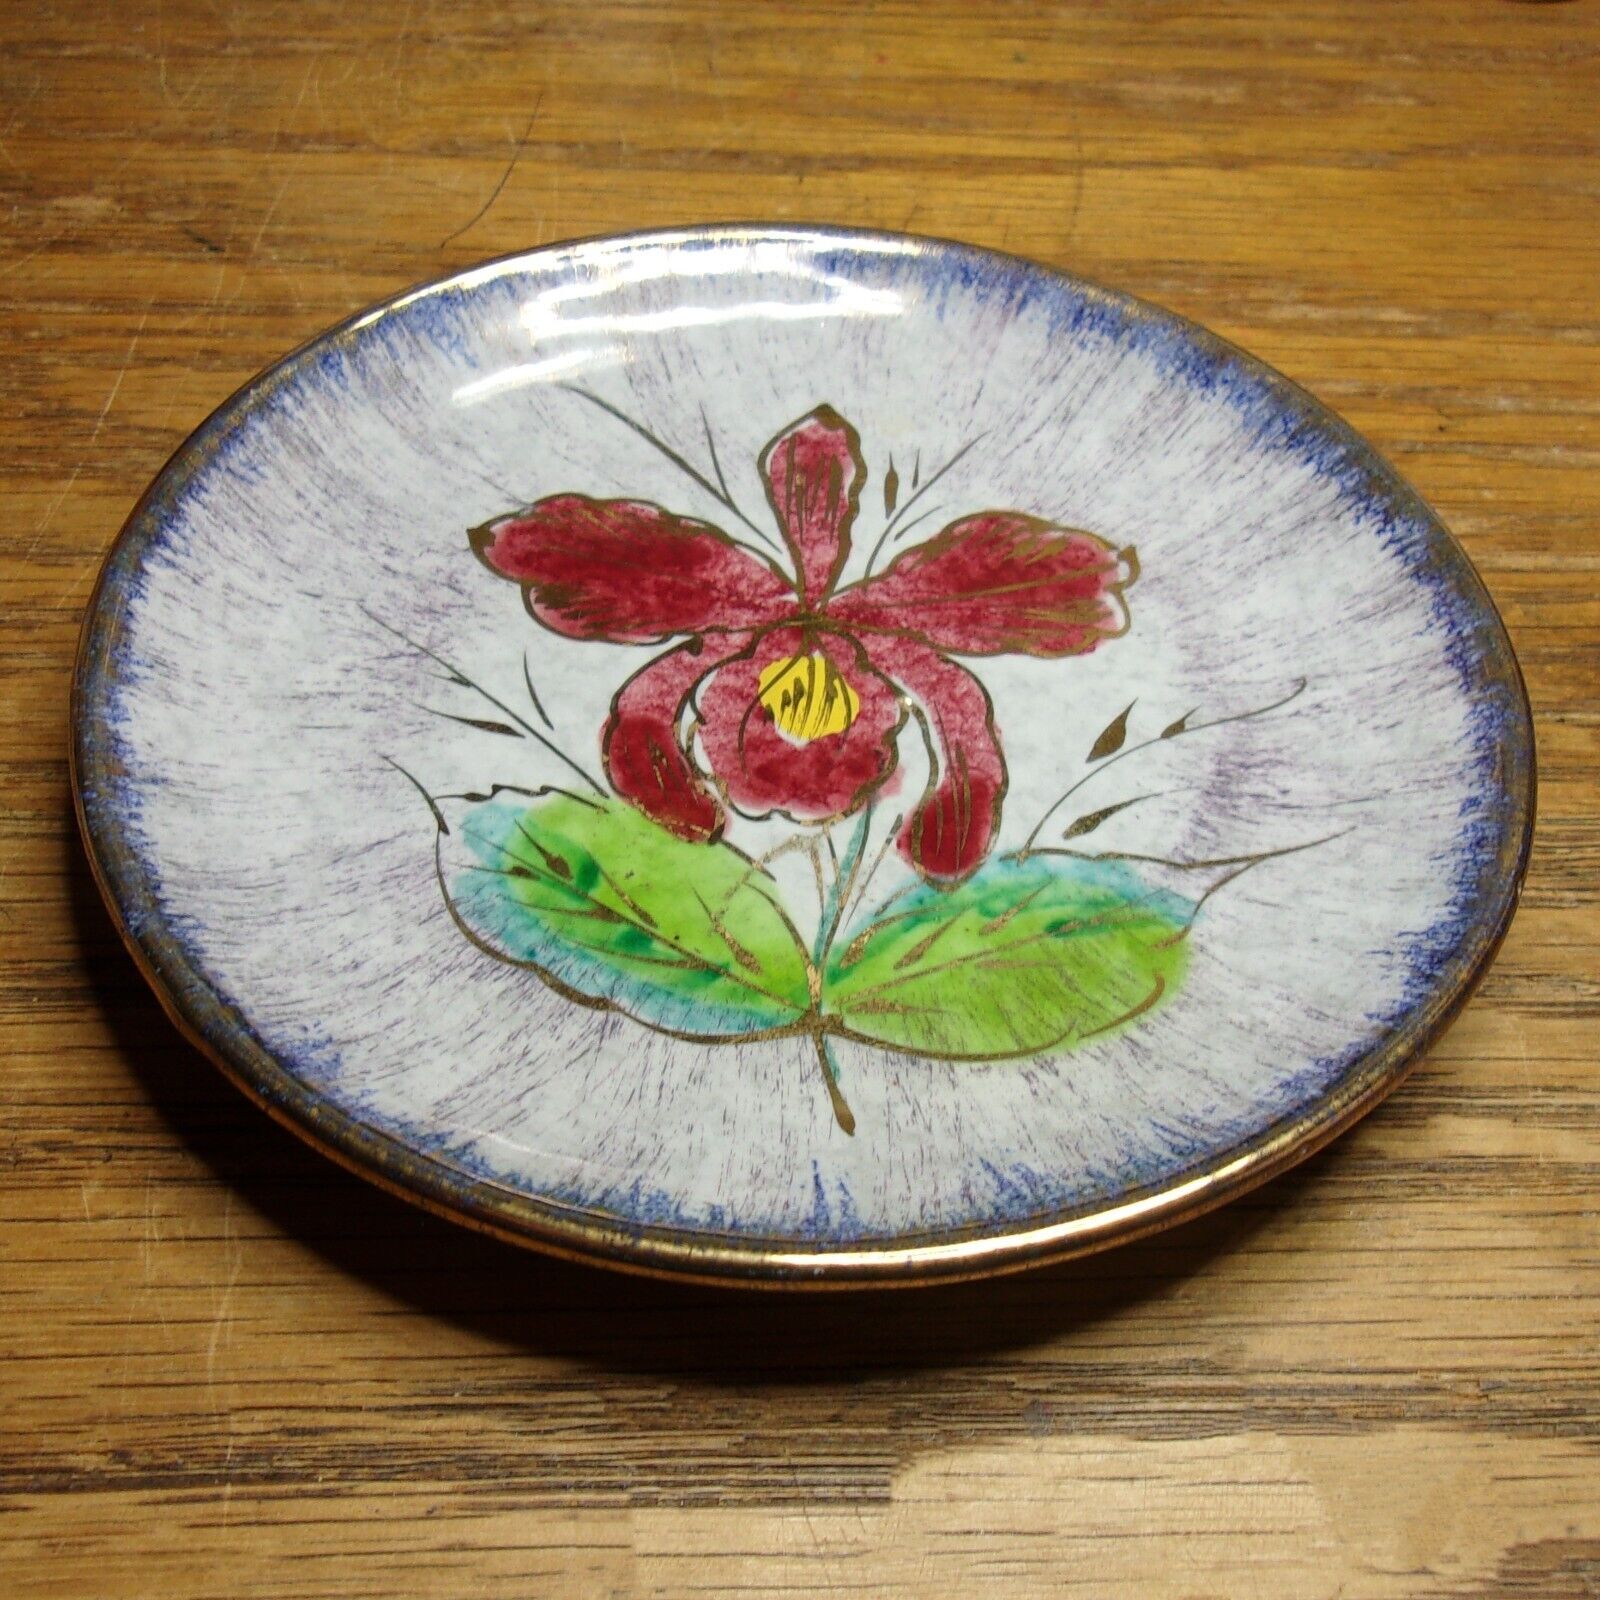 VINTAGE Italian Hand Painted Porcelain Plate with Floral Design Made in Italy